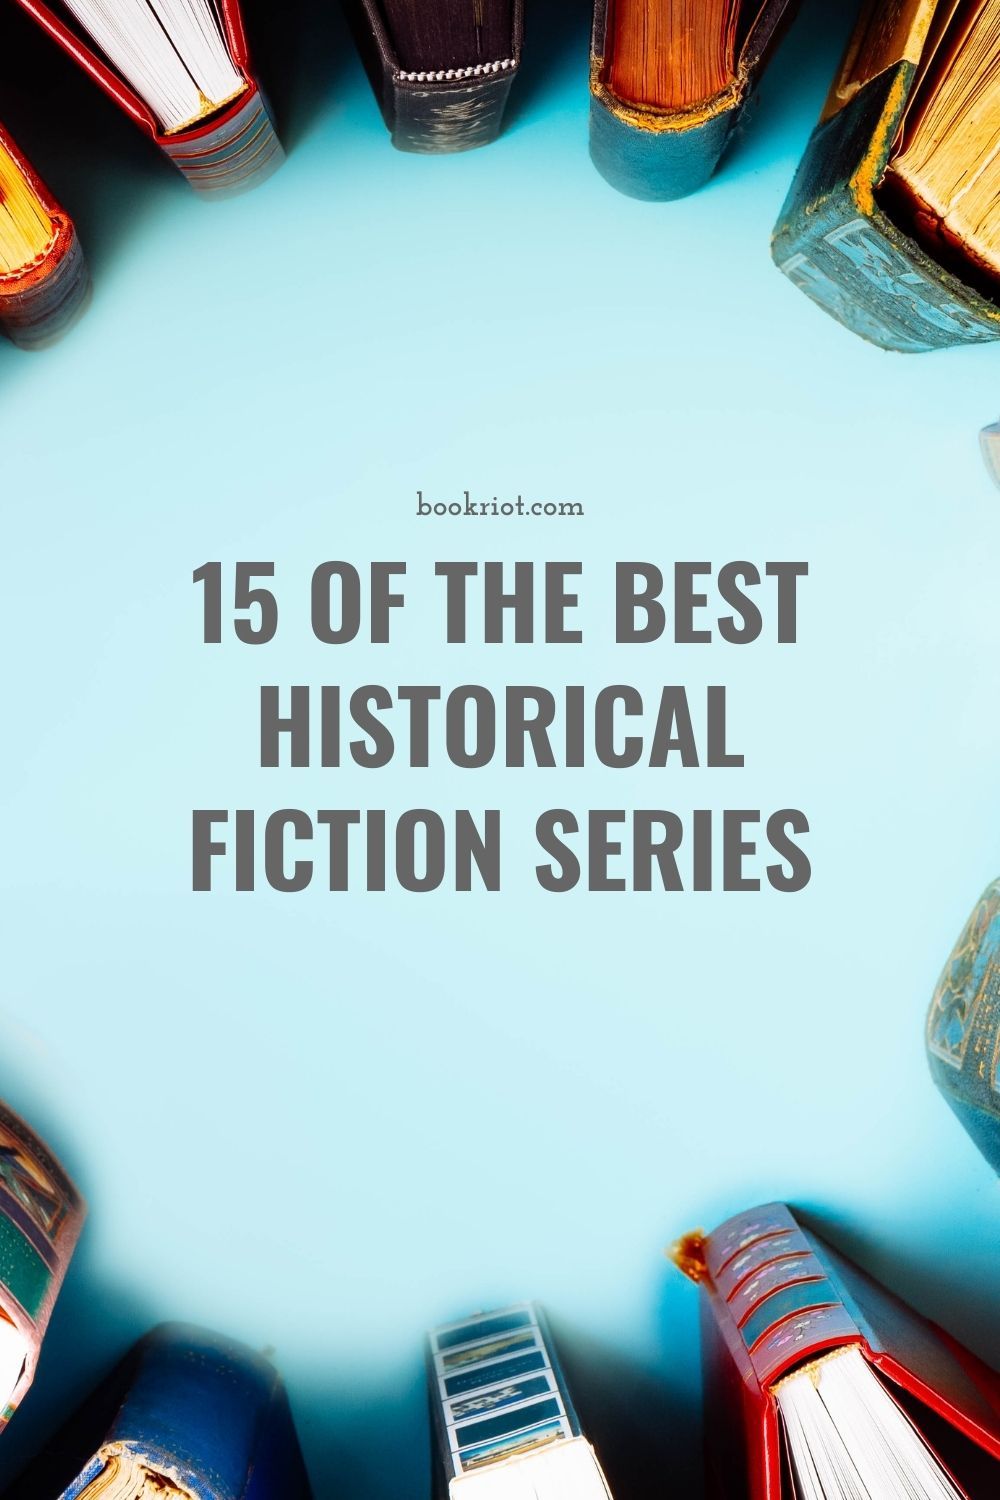 15 Of The Best Historical Fiction Series Book Riot